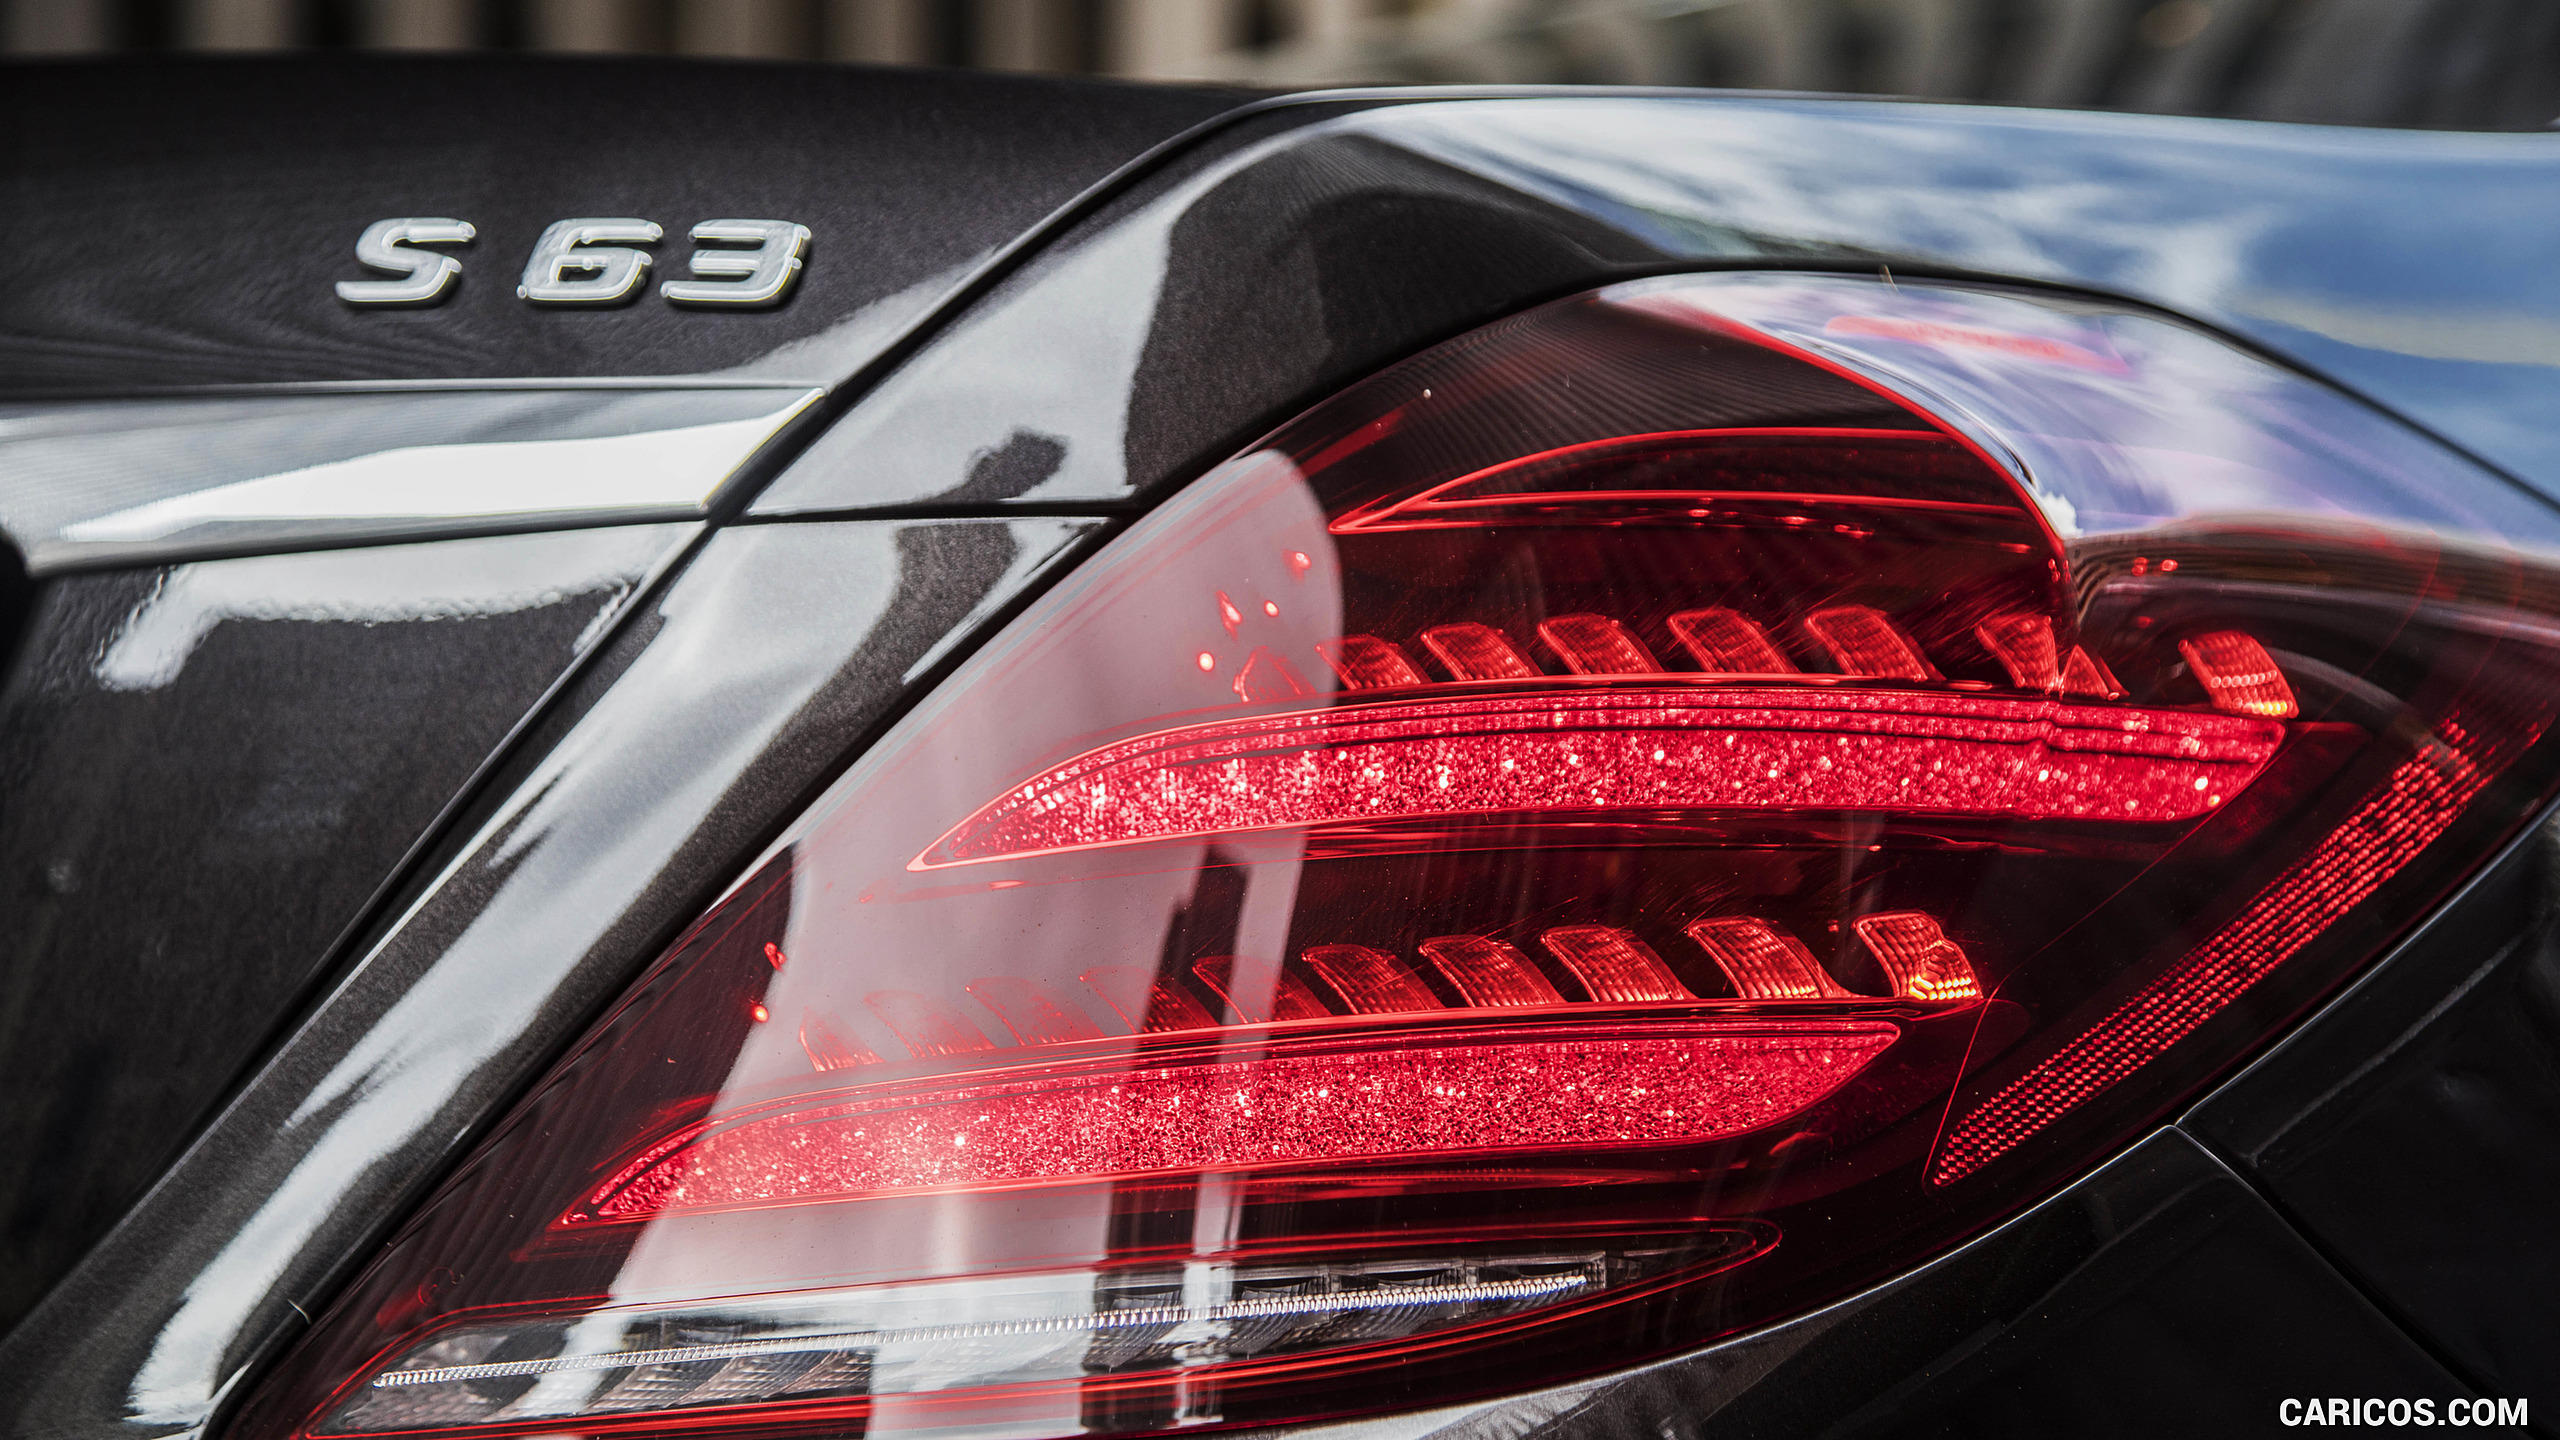 2018 Mercedes-AMG S63 - Tail Light, #98 of 100